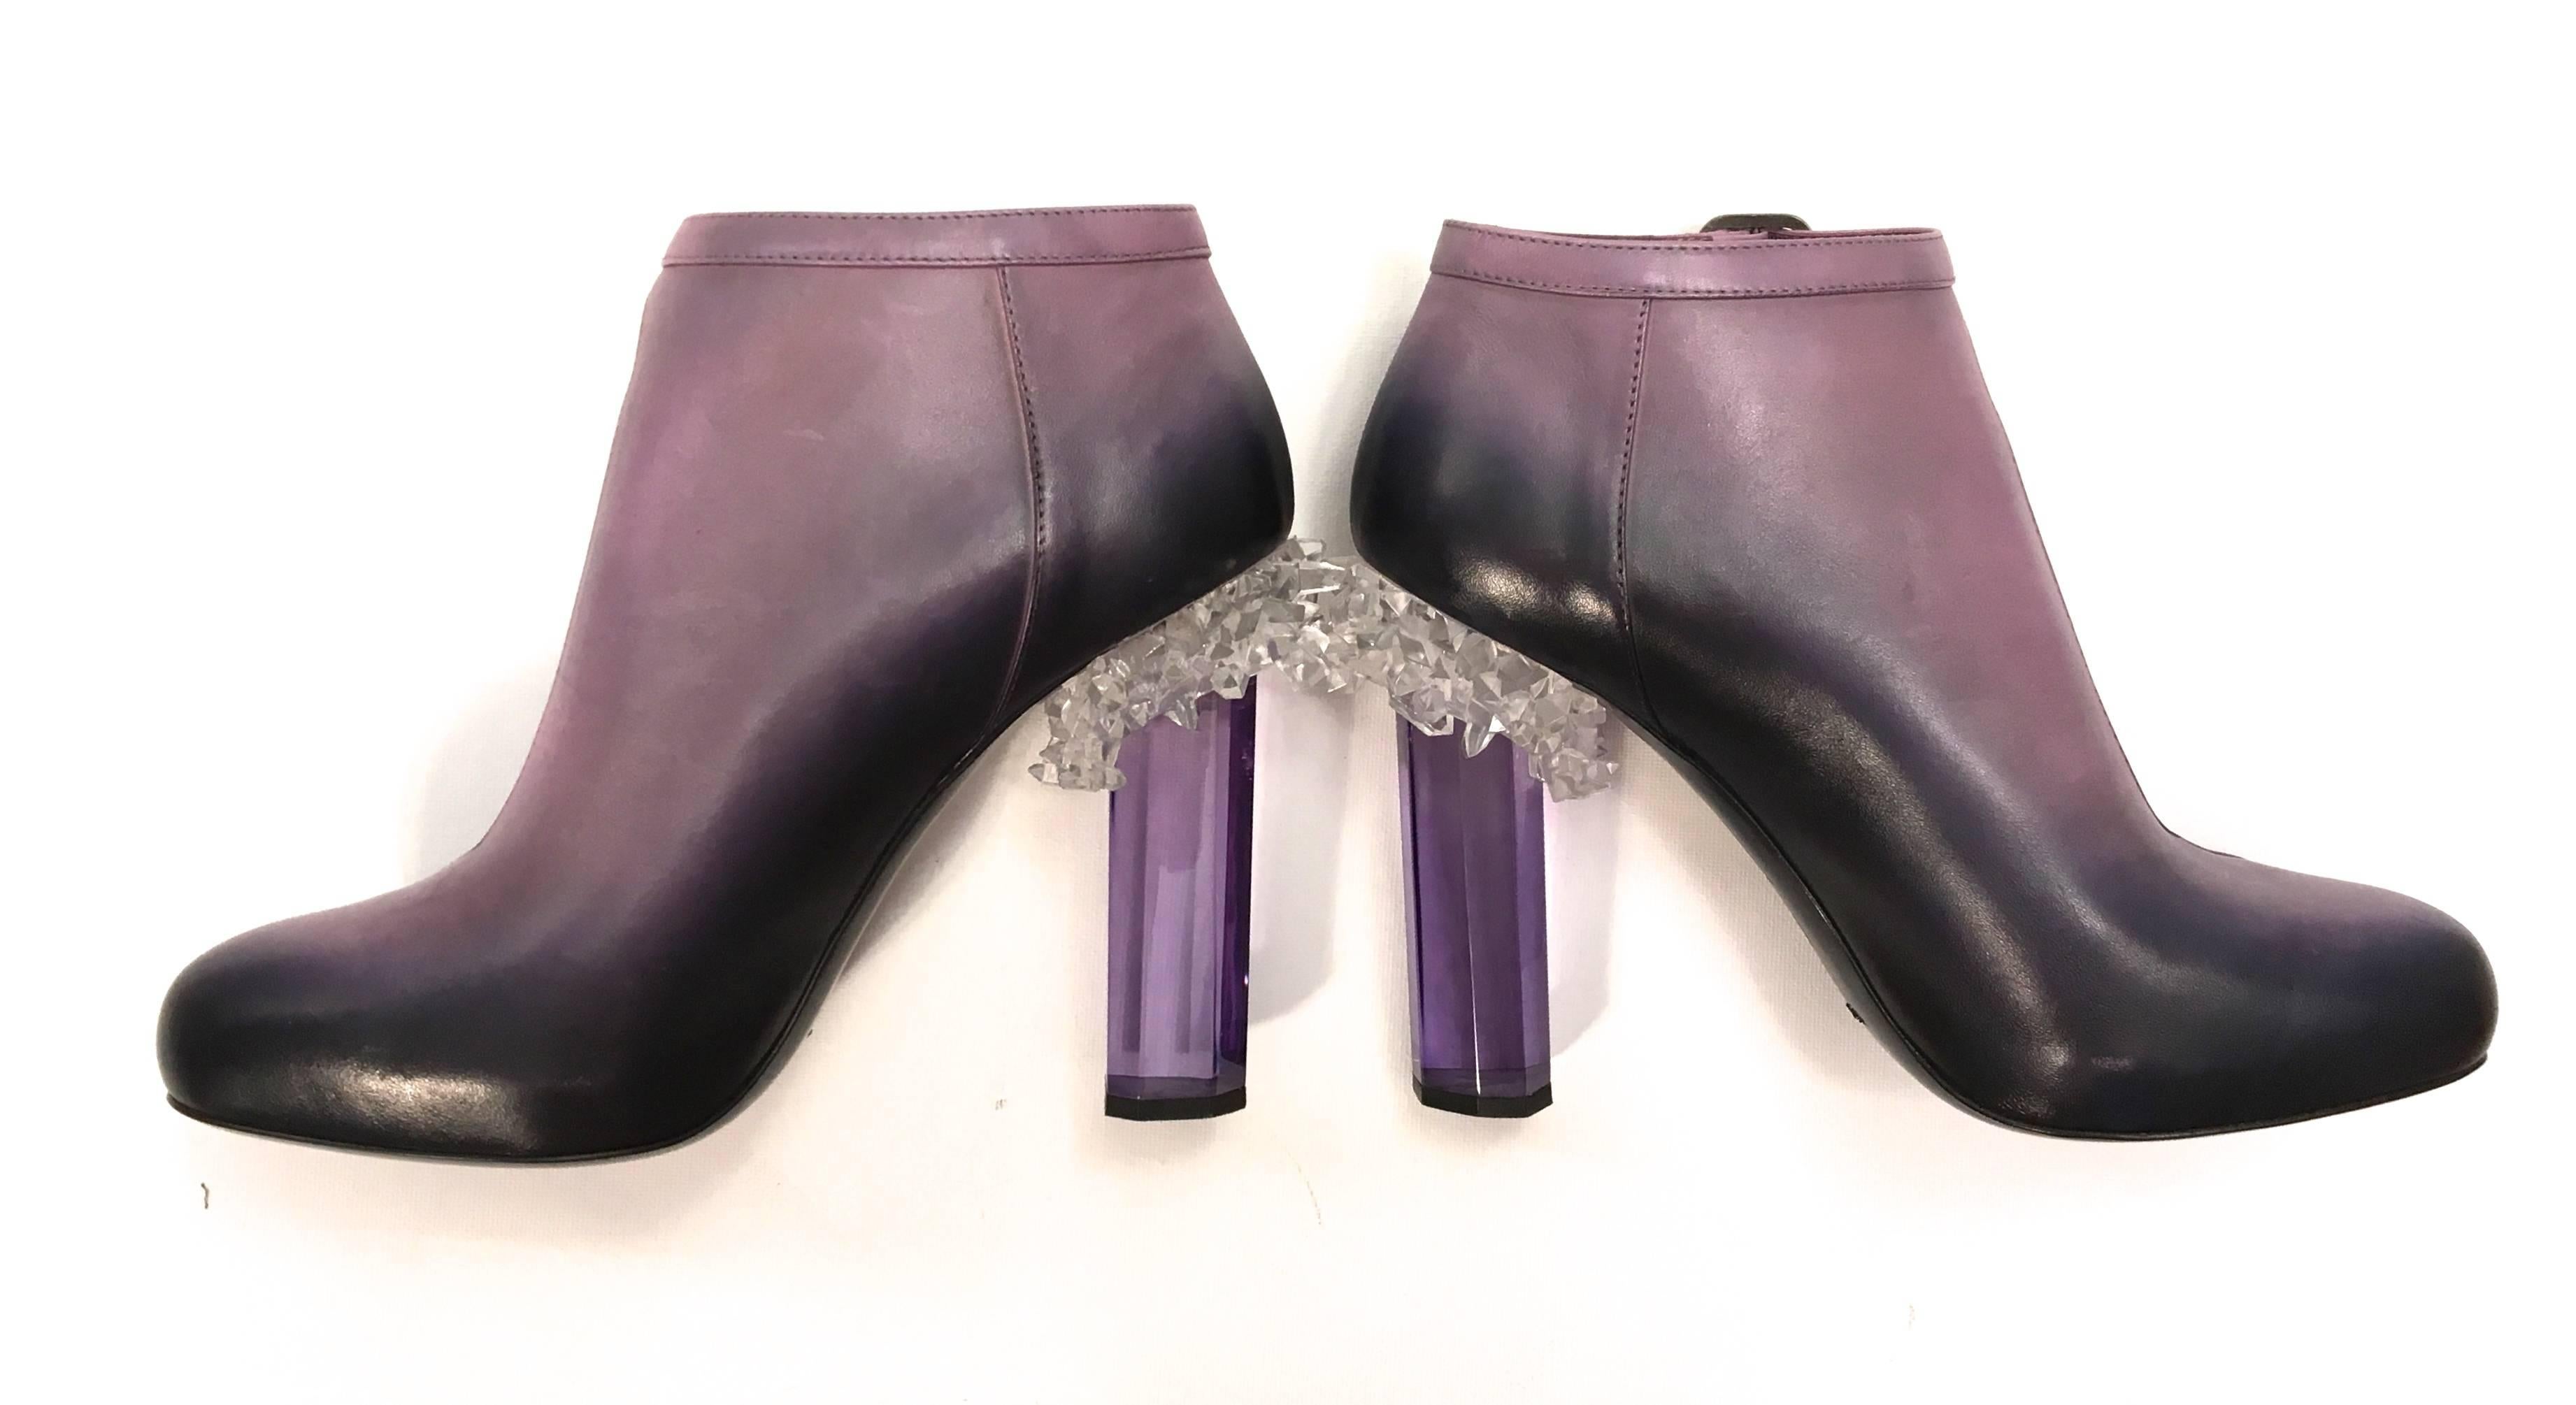 Women's Rare Chanel Runway Boots - Purple and Black - Lucite Heels - Size 38